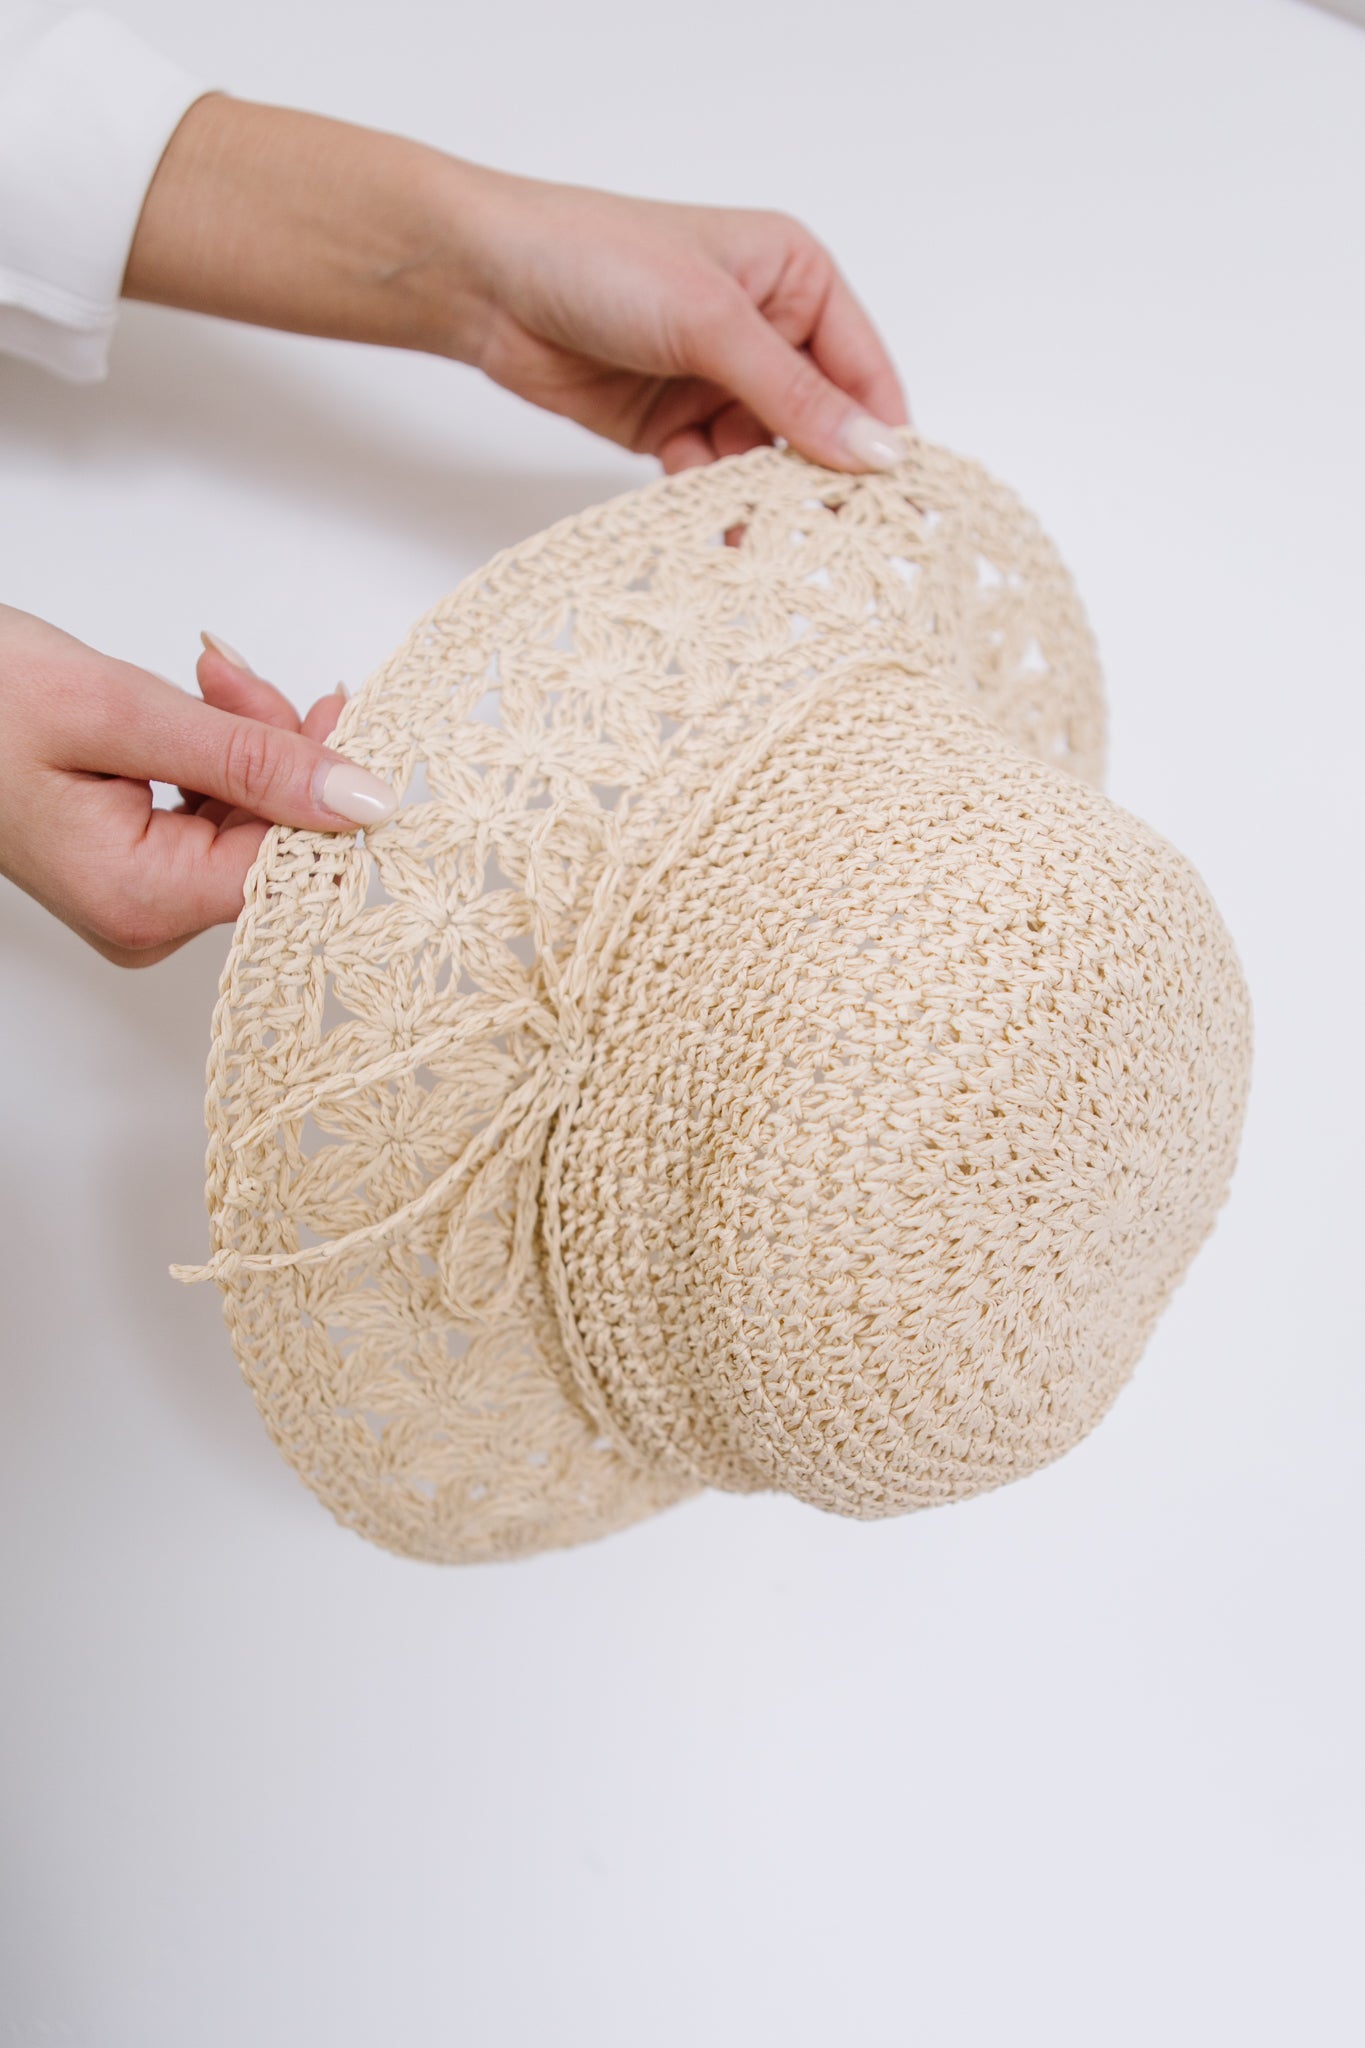 Braided Bow Straw Hat-Womens-Graceful & Chic Boutique, Family Clothing Store in Waxahachie, Texas